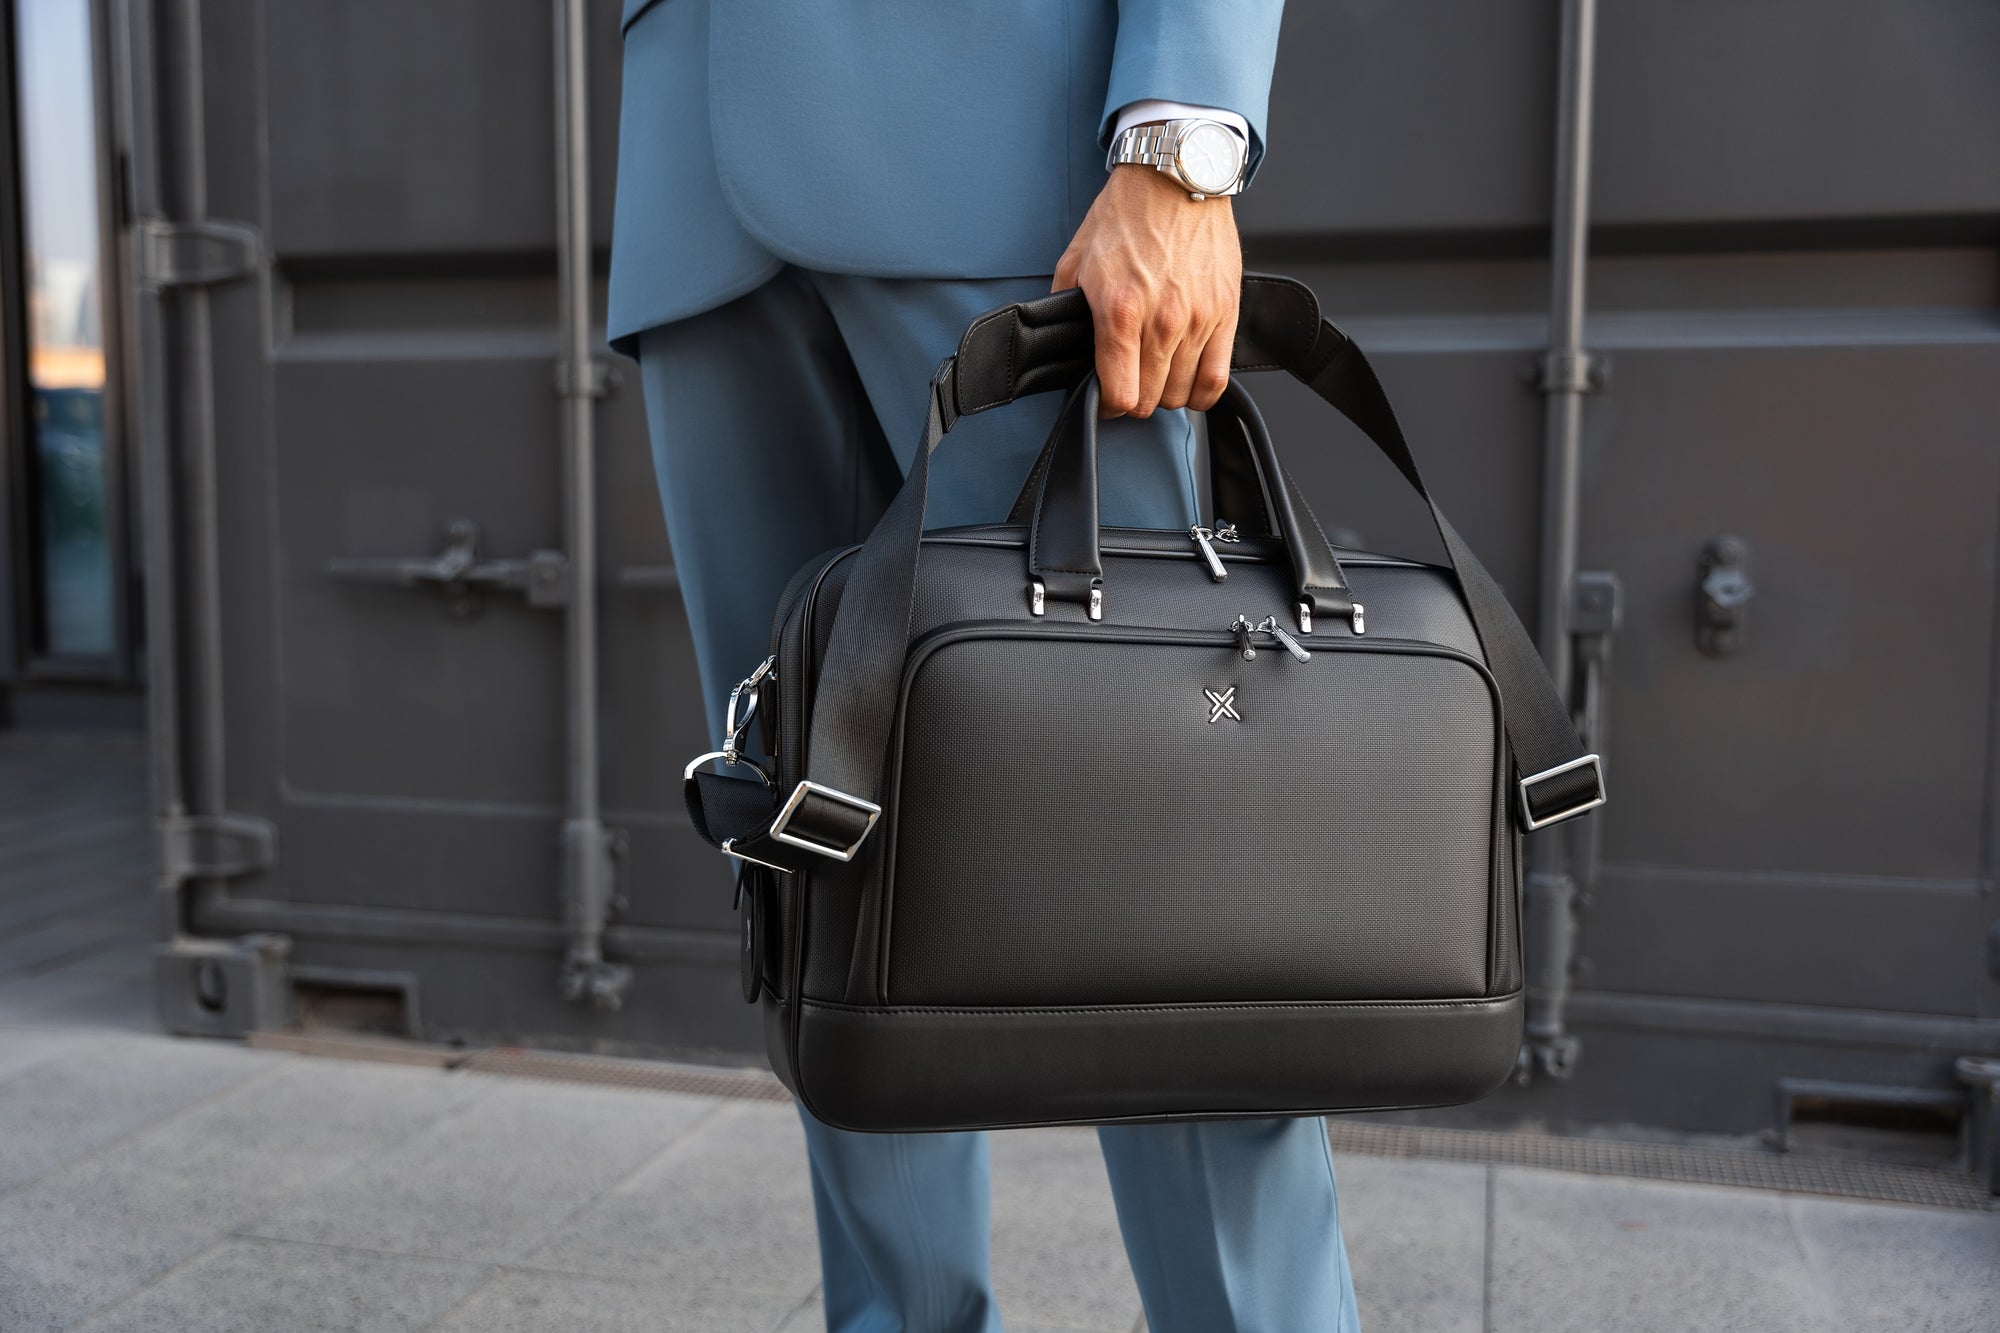 Introducing xBriefcase: The World’s Most Durable and High-Tech Briefcase, Designed for Modern Professionals